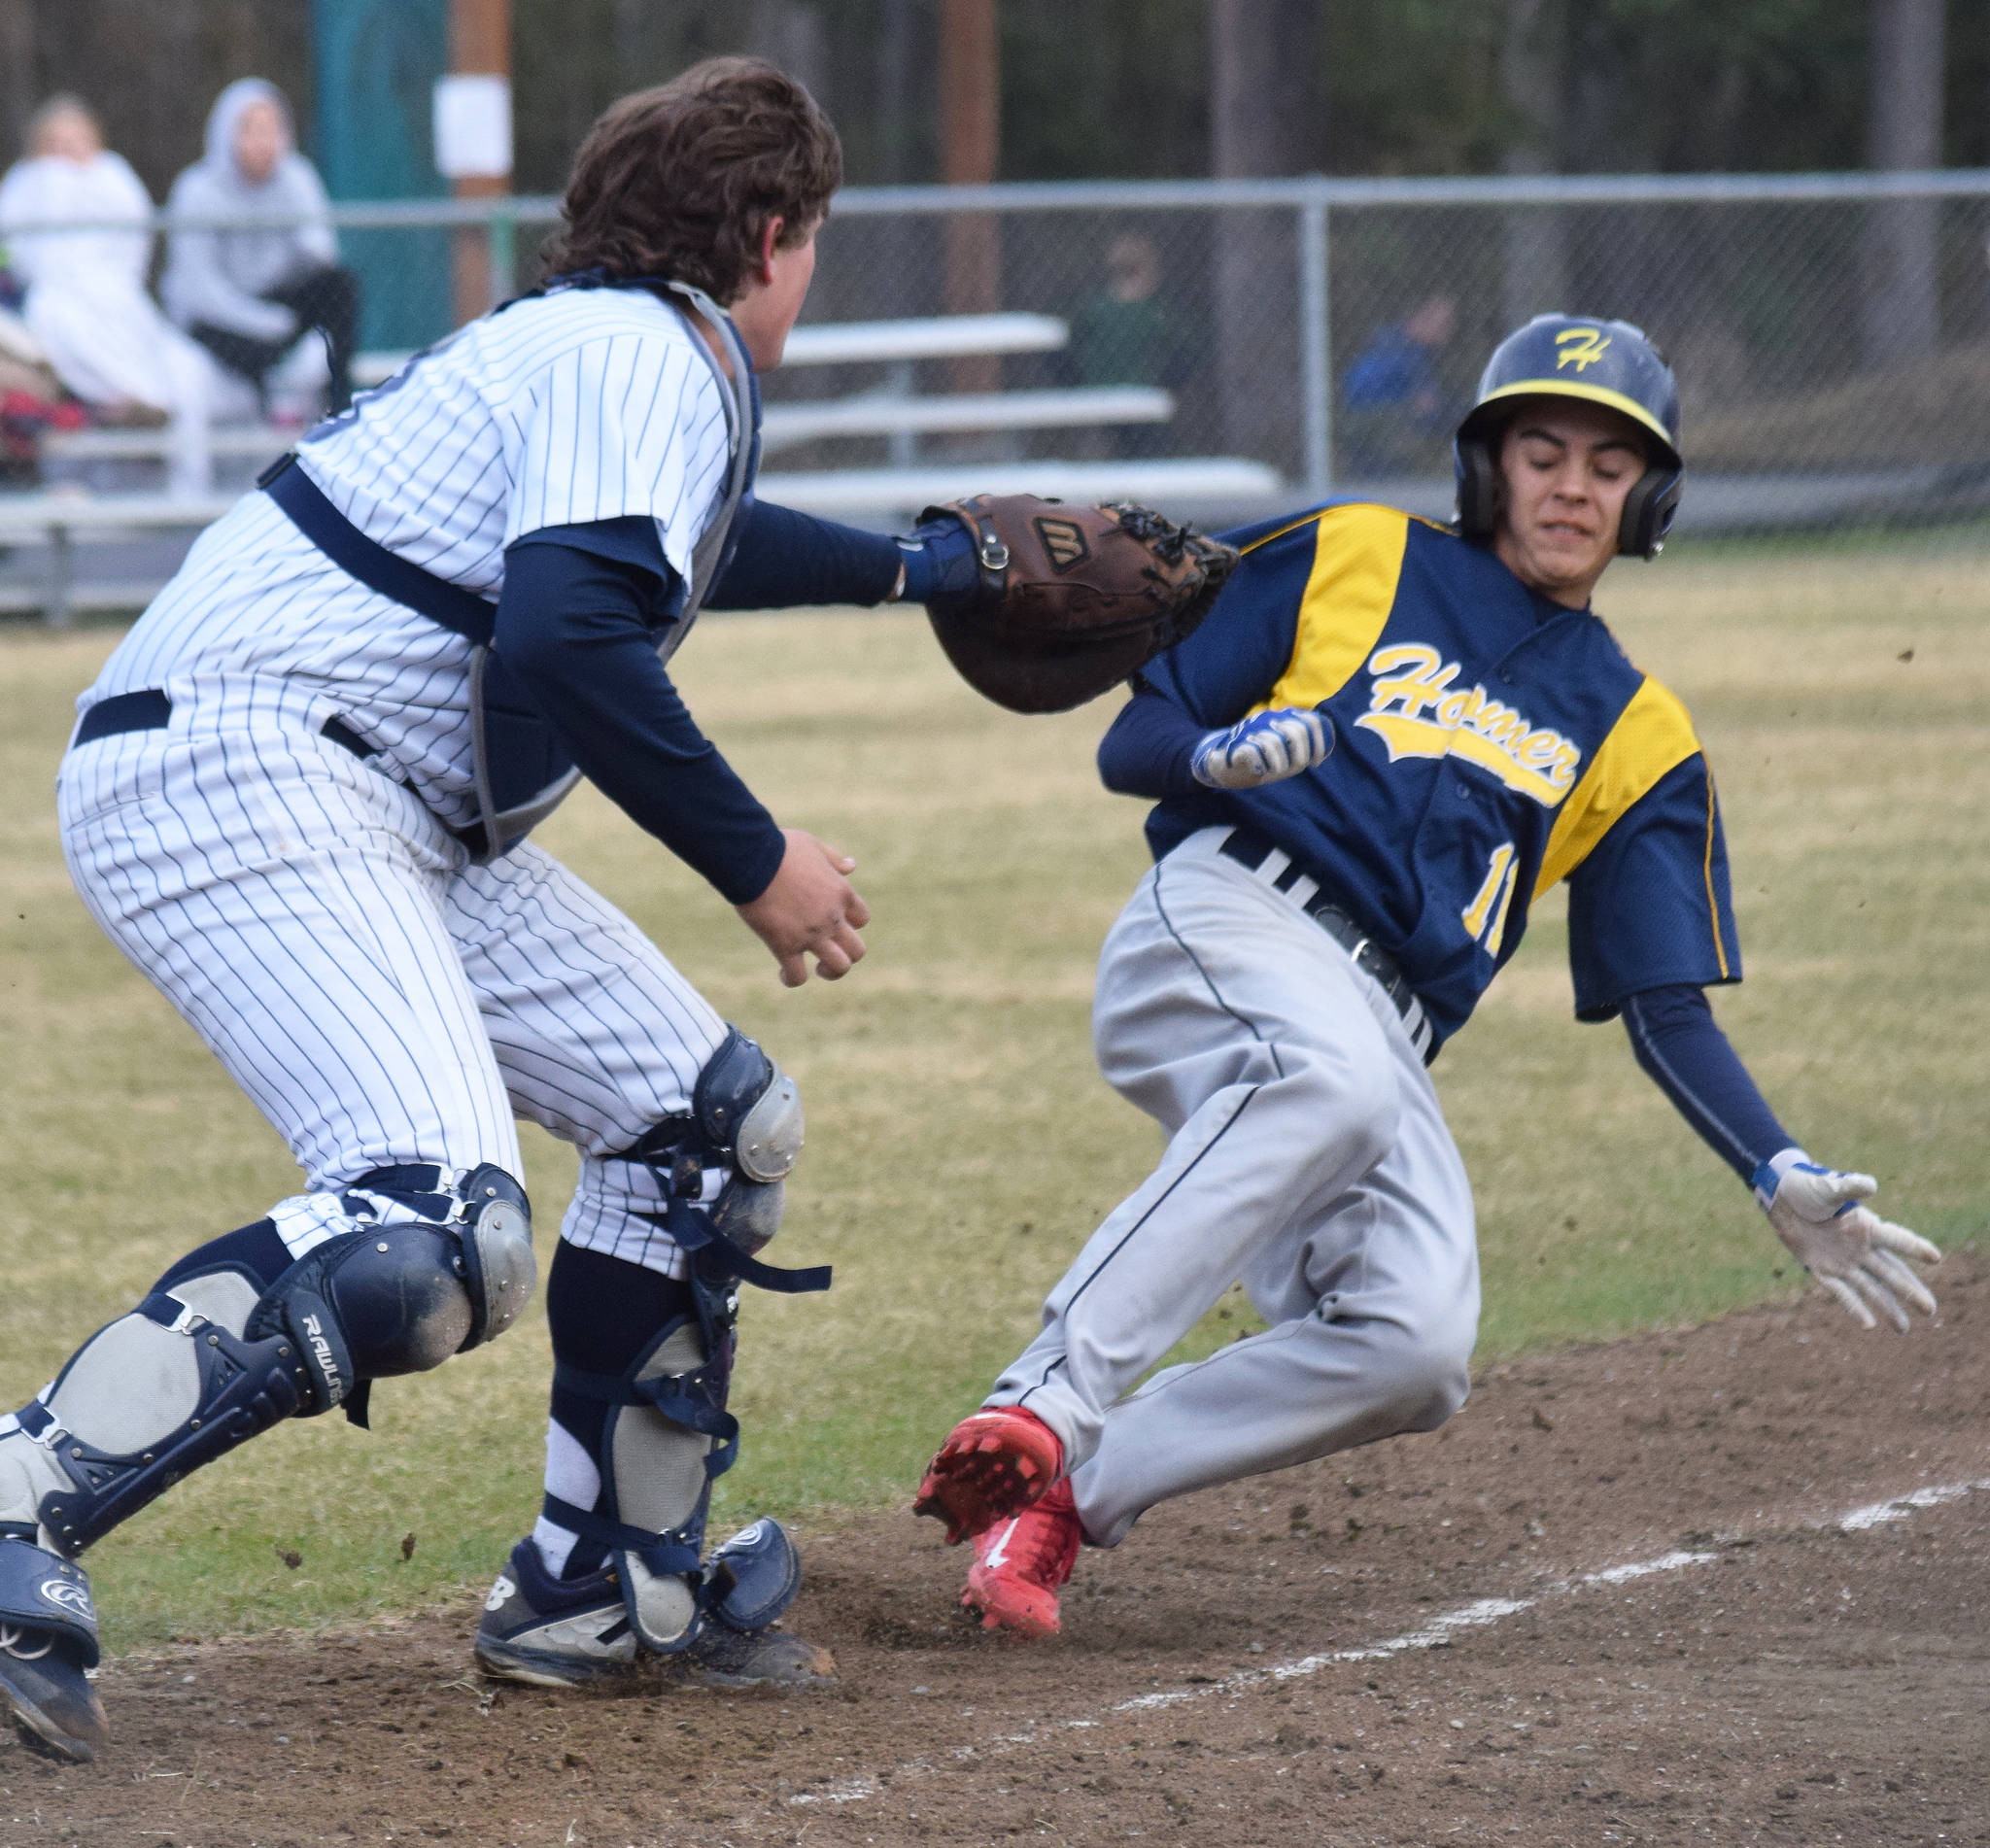 Soldotna catcher Jacob Boze applies the tag on Homer’s Karl Wickstrom at home plate Wednesday, May 15, 2019, at the Soldotna Little League Fields in Soldotna, Alaska. (Photo by Joey Klecka/Peninsula Clarion)